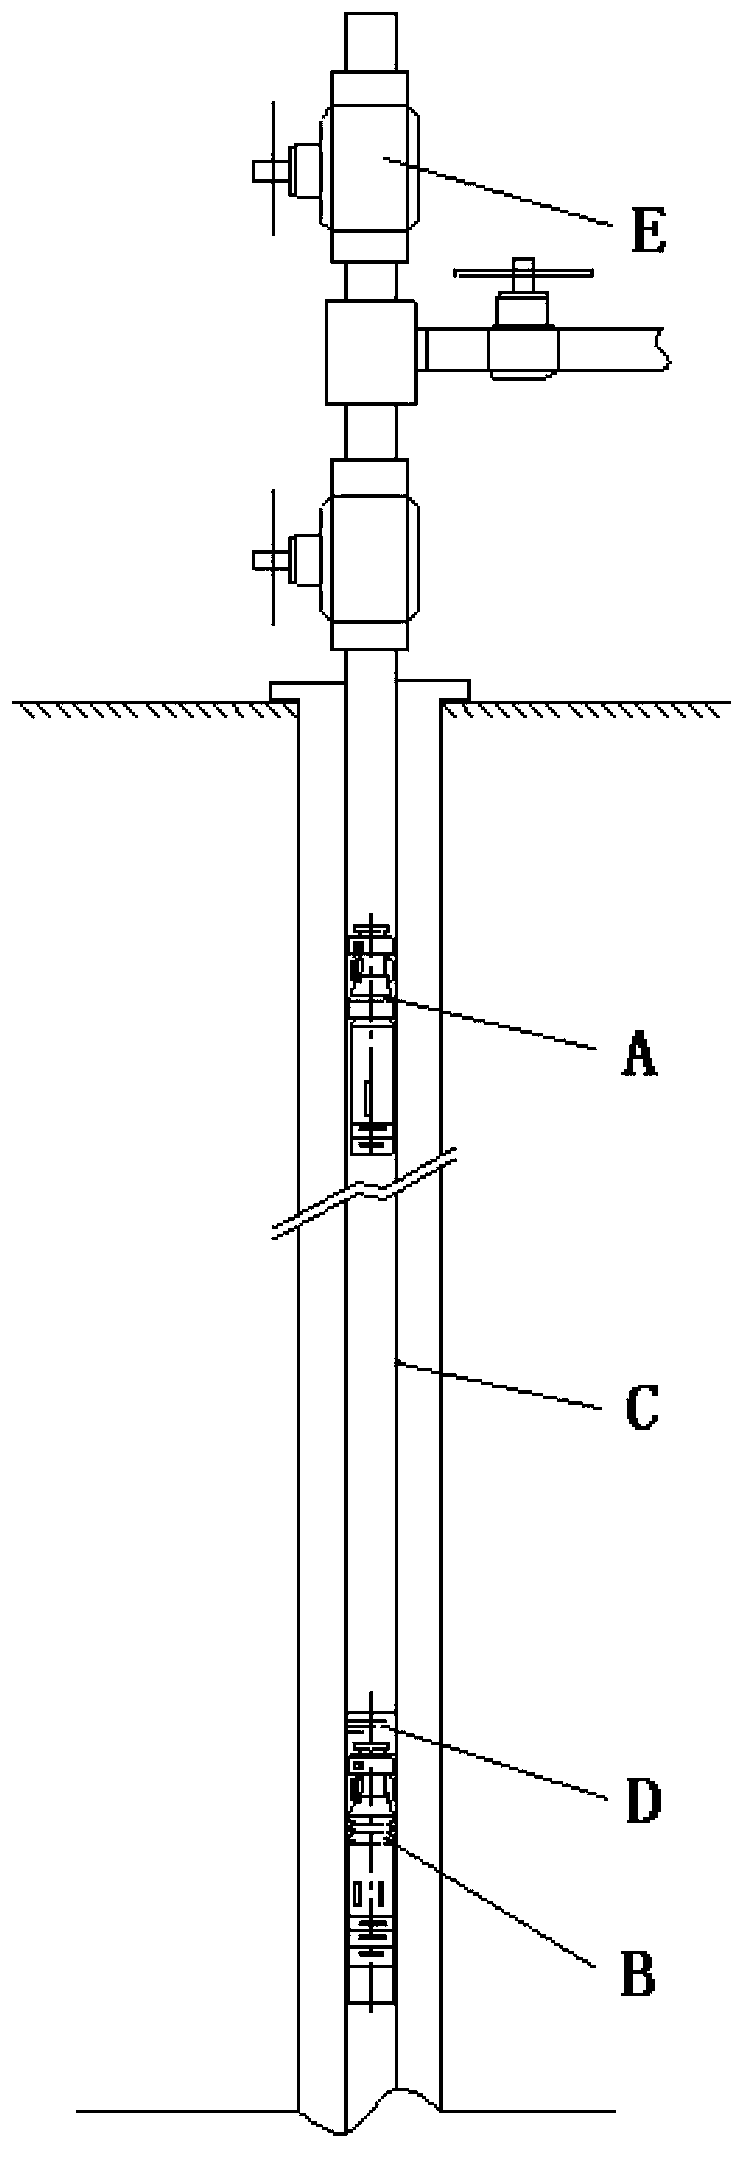 Gas well downhole multistage ultrasonic atomization water drainage and gas production device